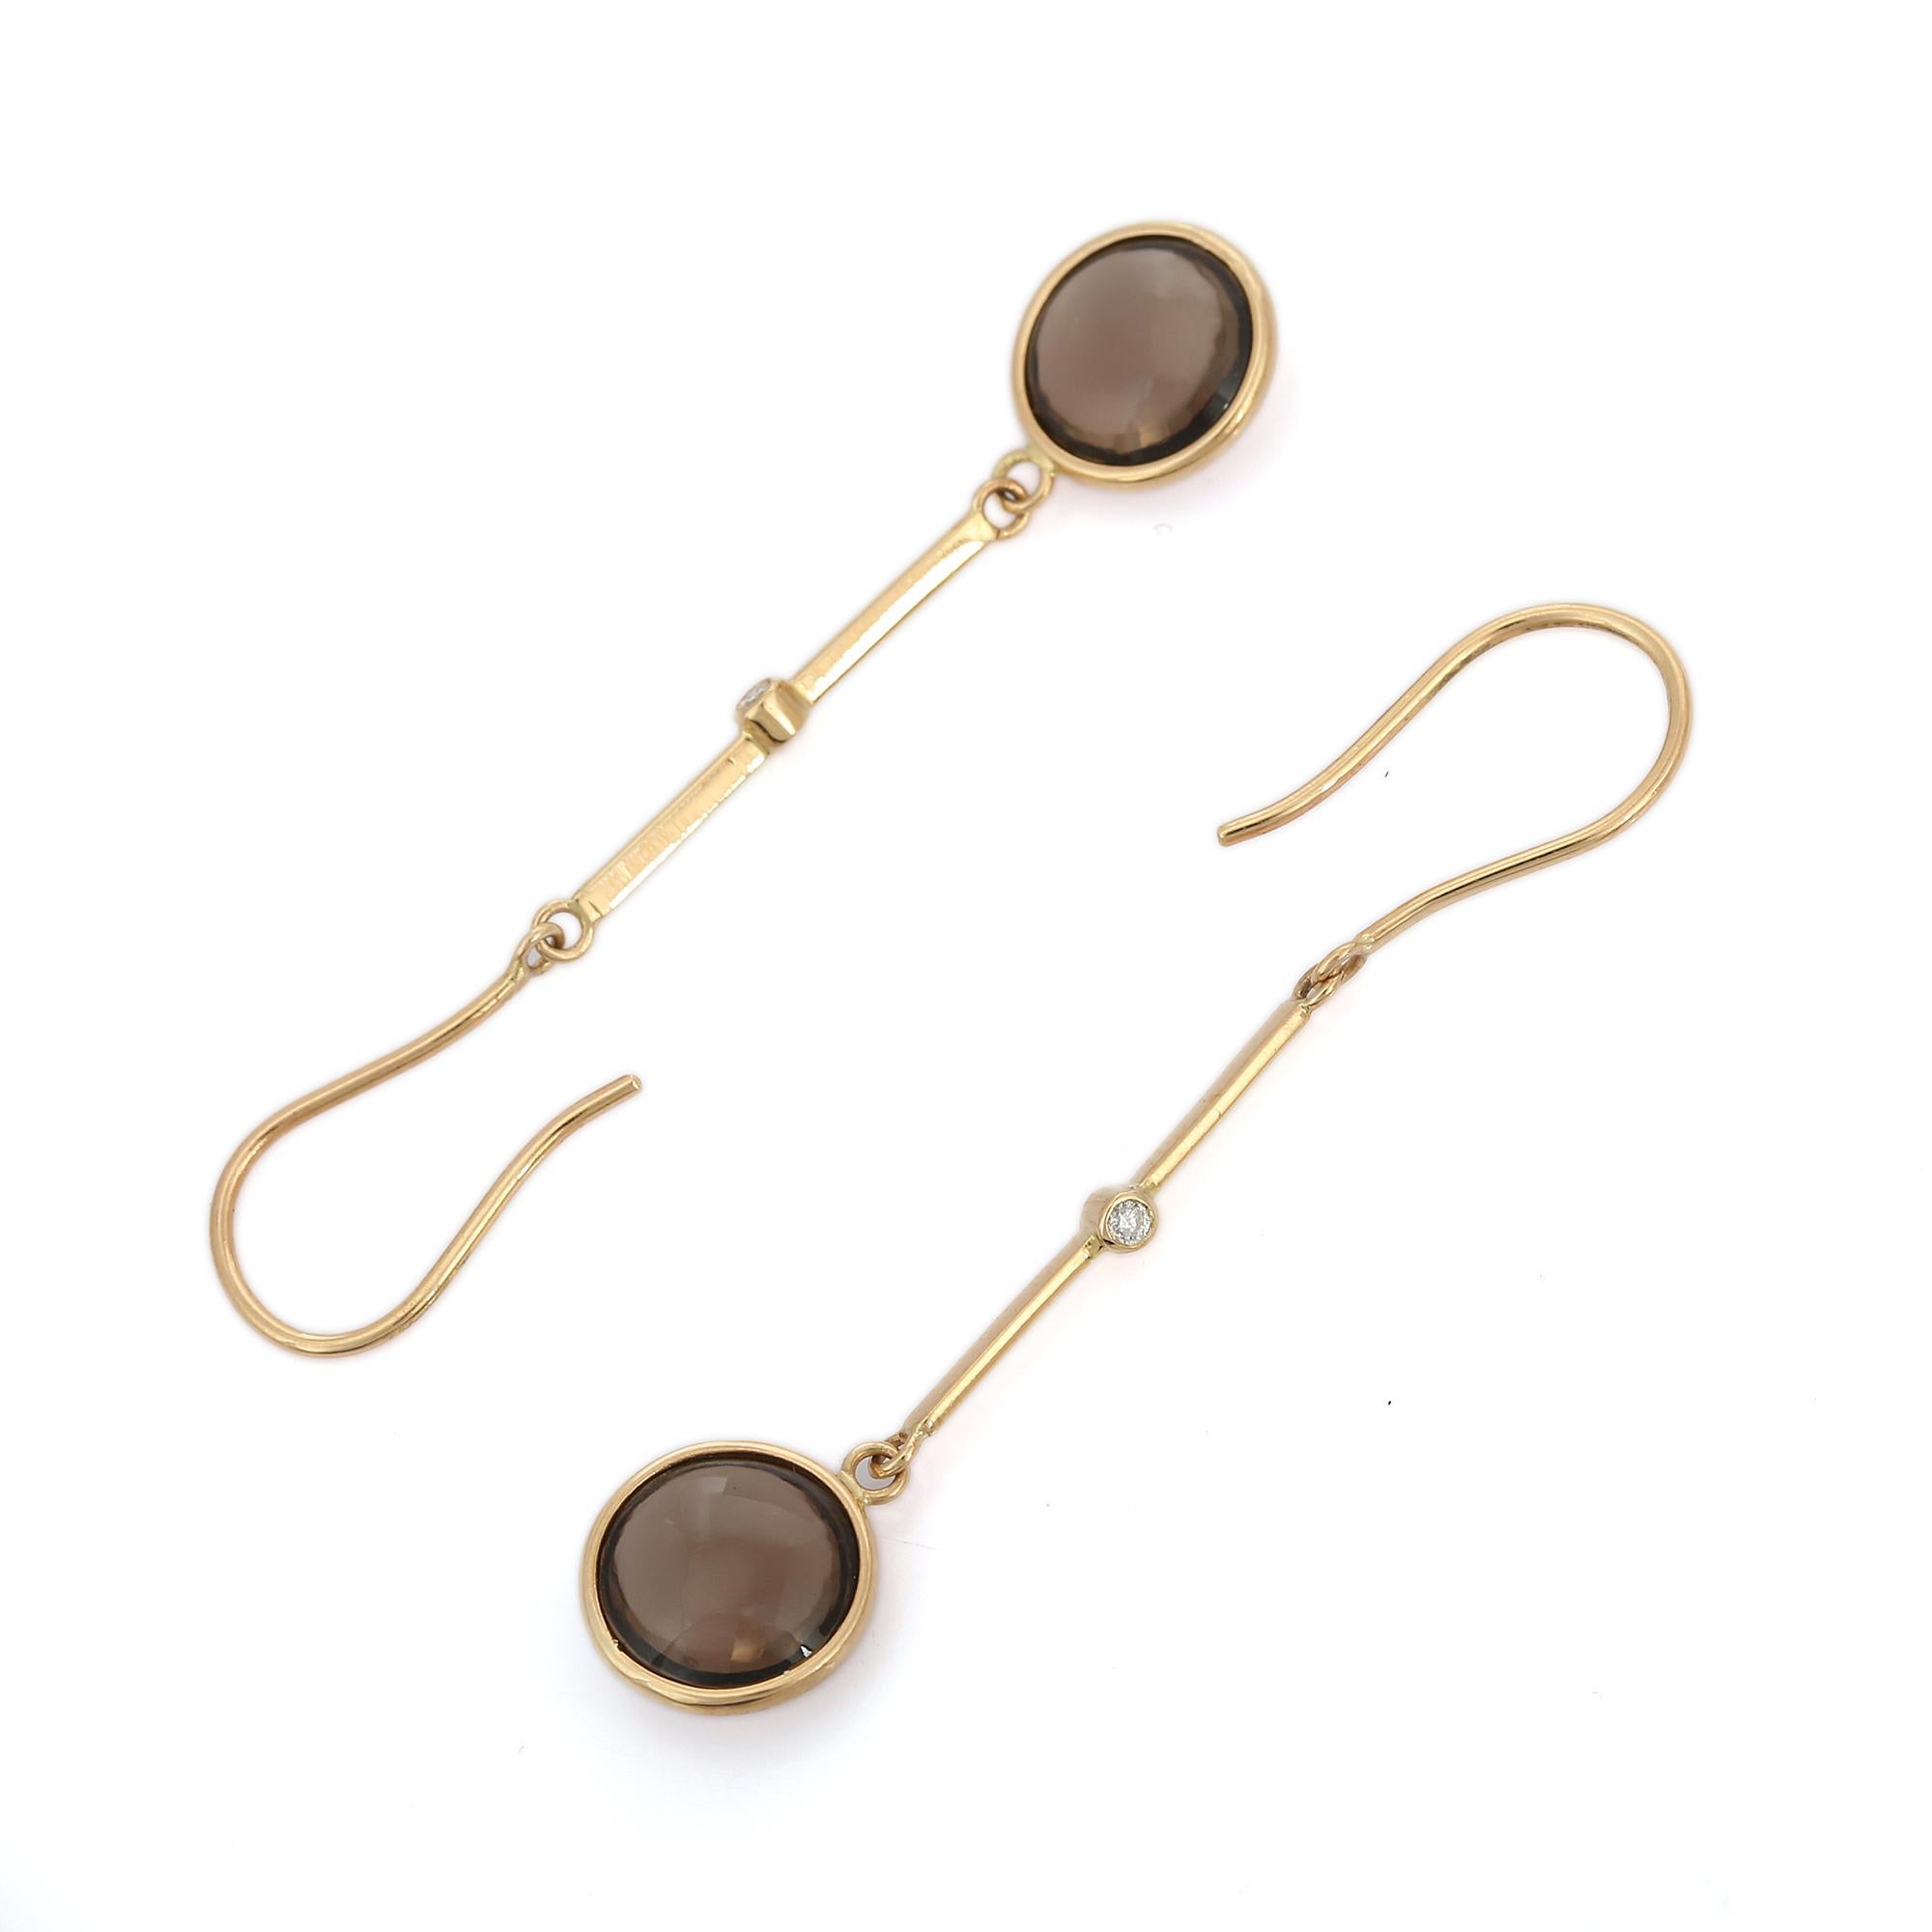 18K Yellow Gold Smoky Topaz Drop earrings to make a statement with your look. These earrings create a sparkling, luxurious look featuring round cut gemstone.
If you love to gravitate towards unique styles, this piece of jewelry is perfect for